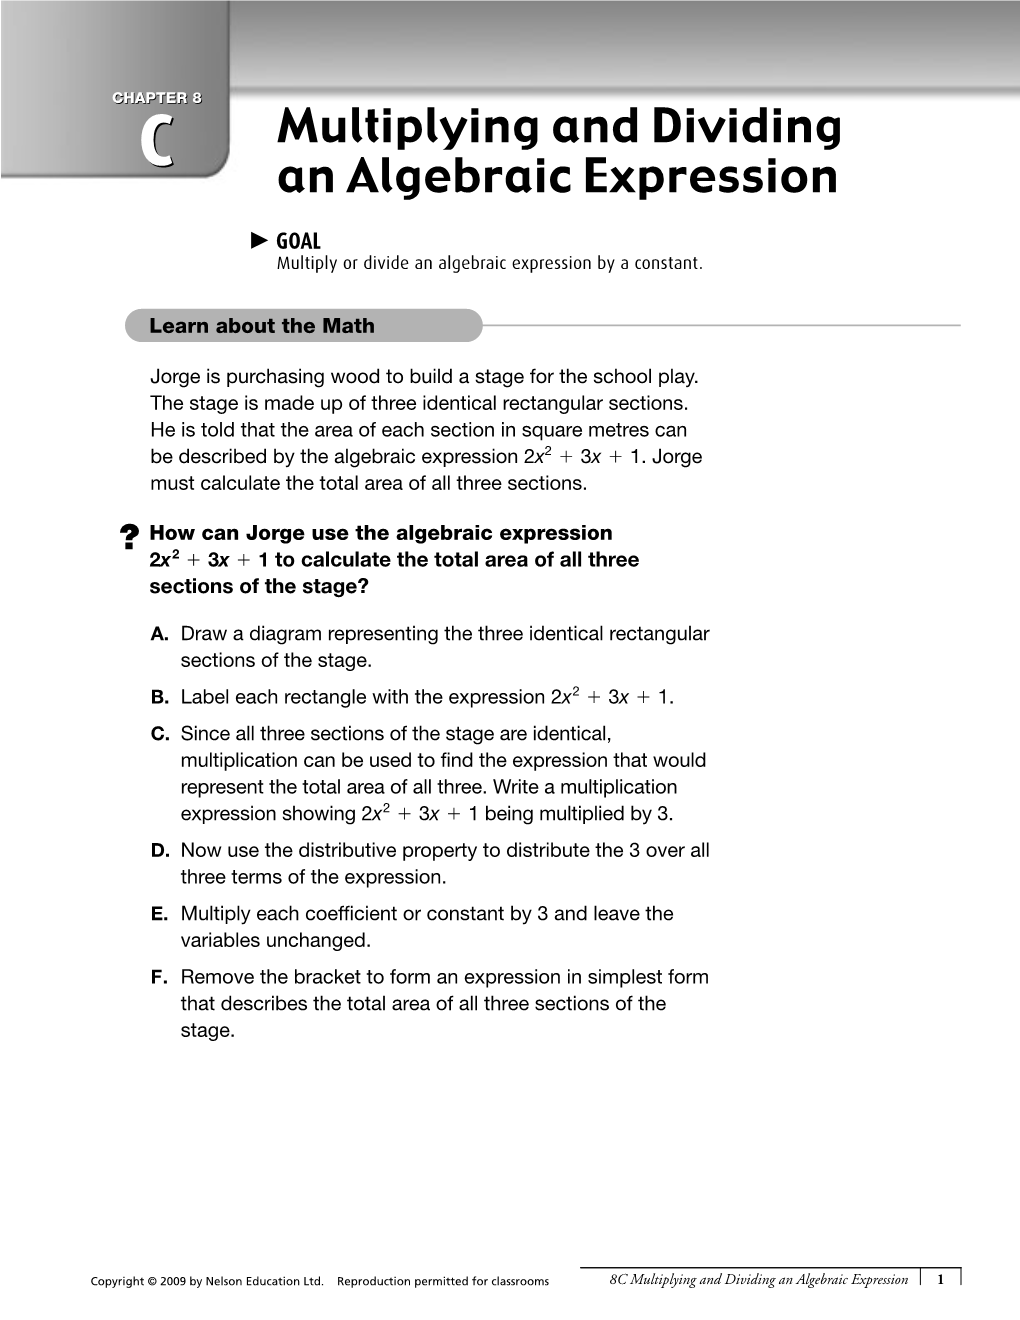 Multiplying and Dividing an Algebraic Expression 1 G